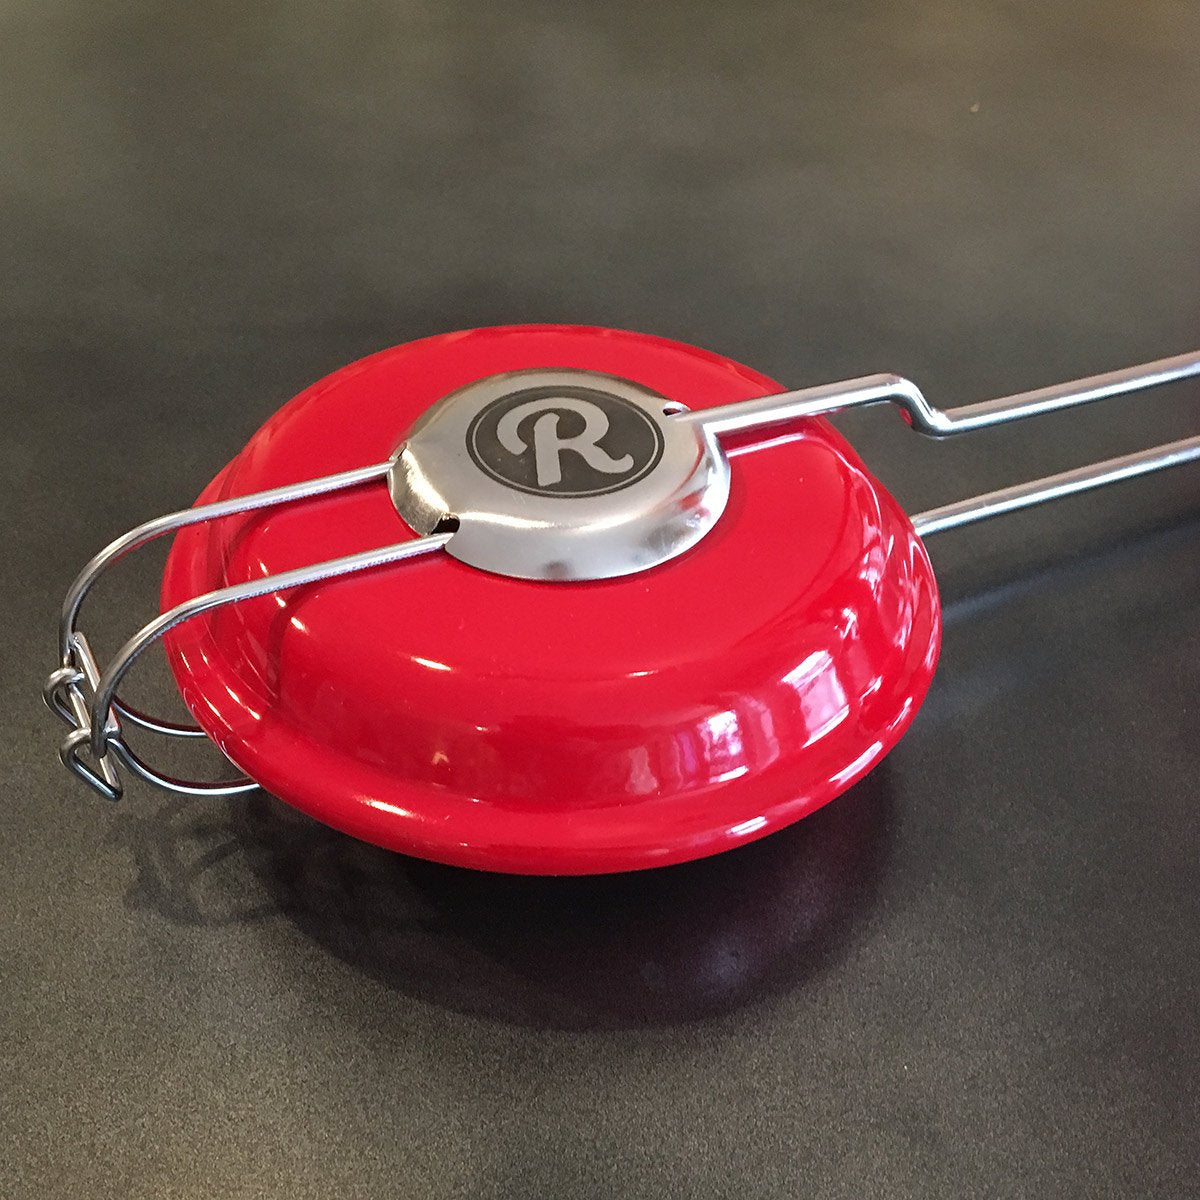 Round Stainless Steel Enameled Pie Iron, Rome Industries #1460